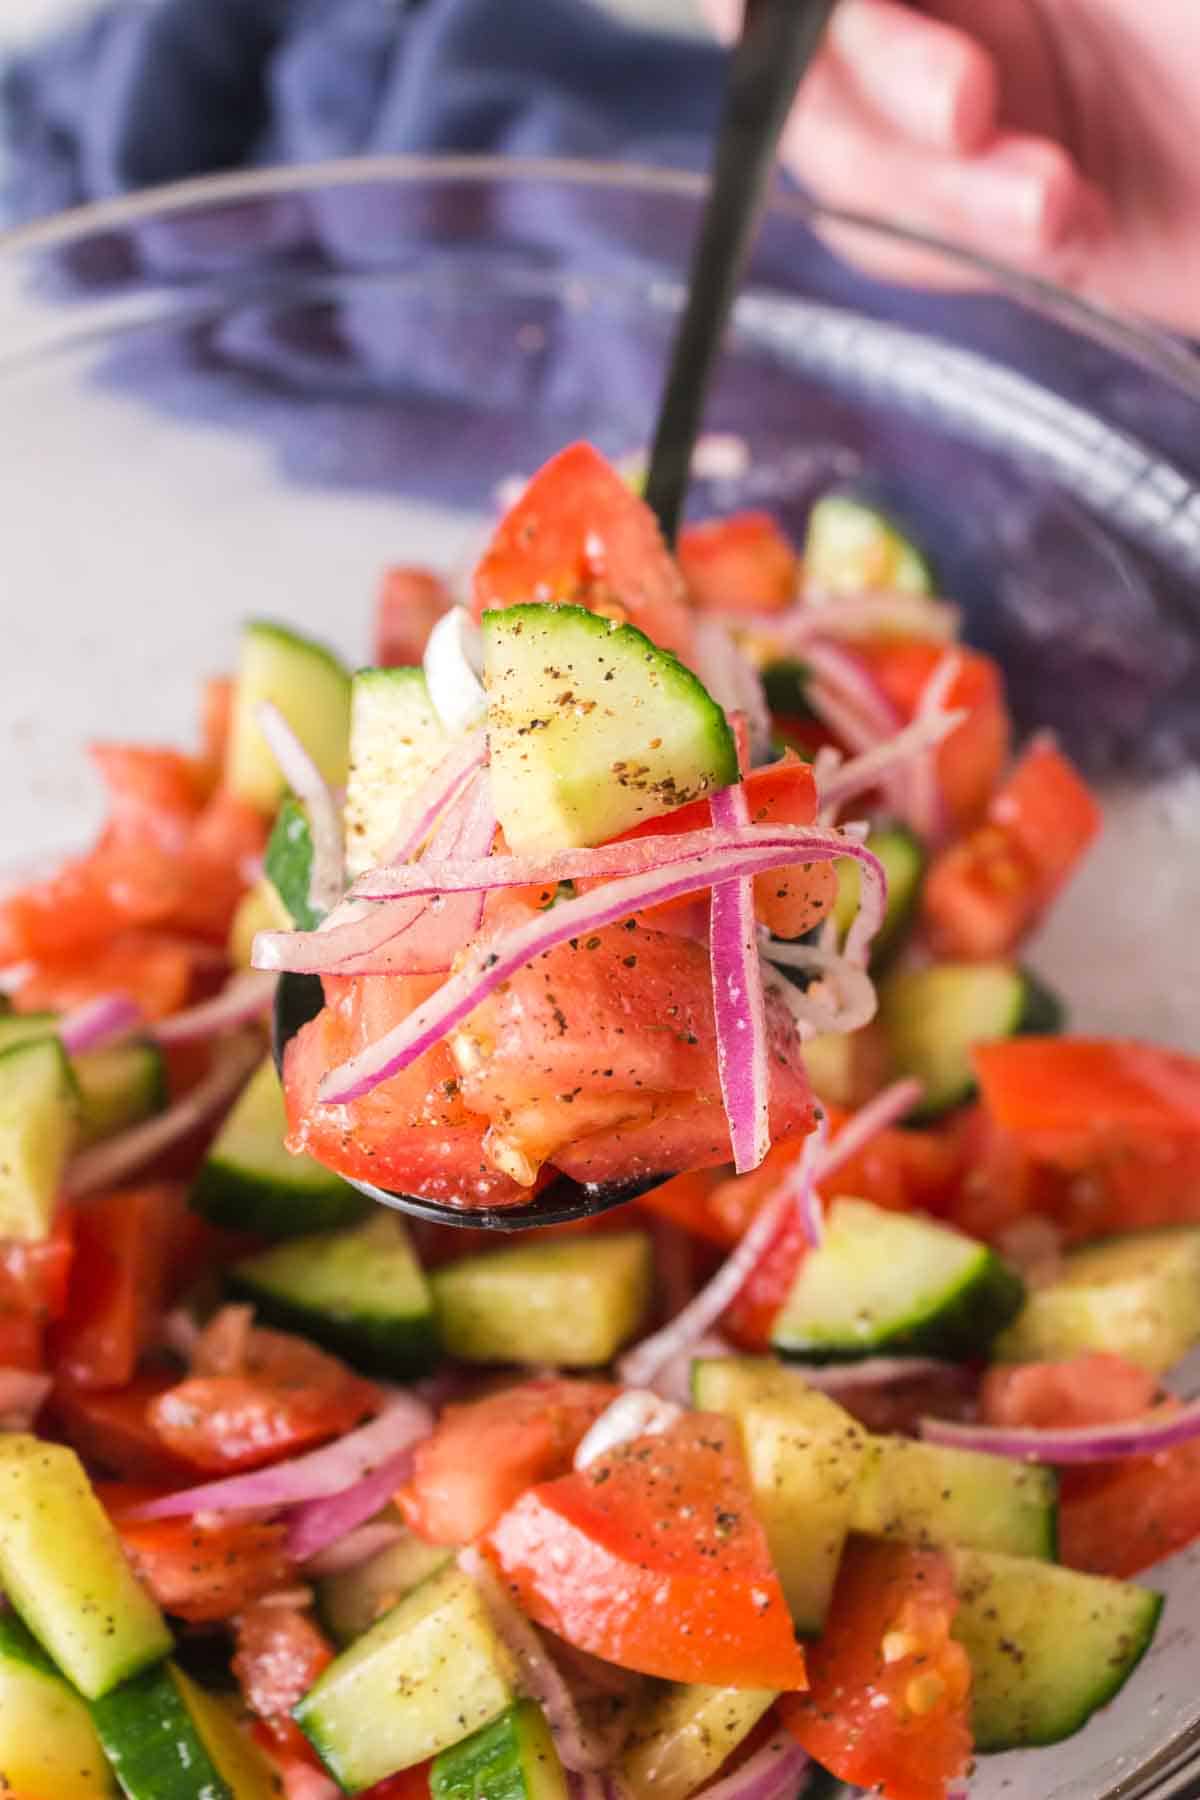 Spoonful of tomato and cucumber salad.